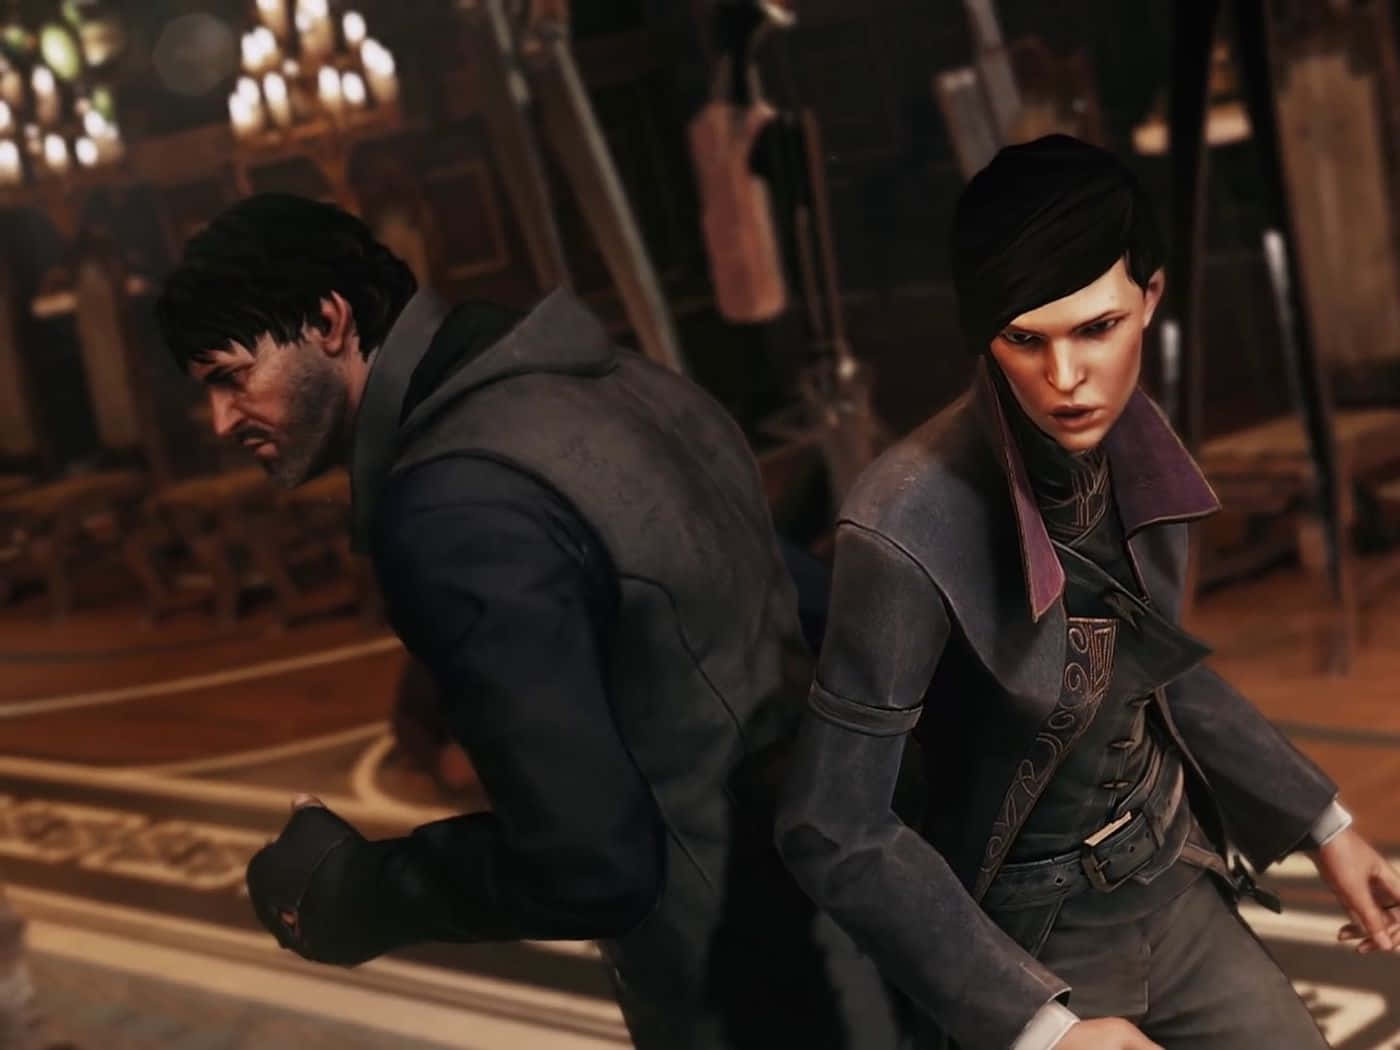 Emily And Corvo Fighting Stance Best Dishonored 2 Background